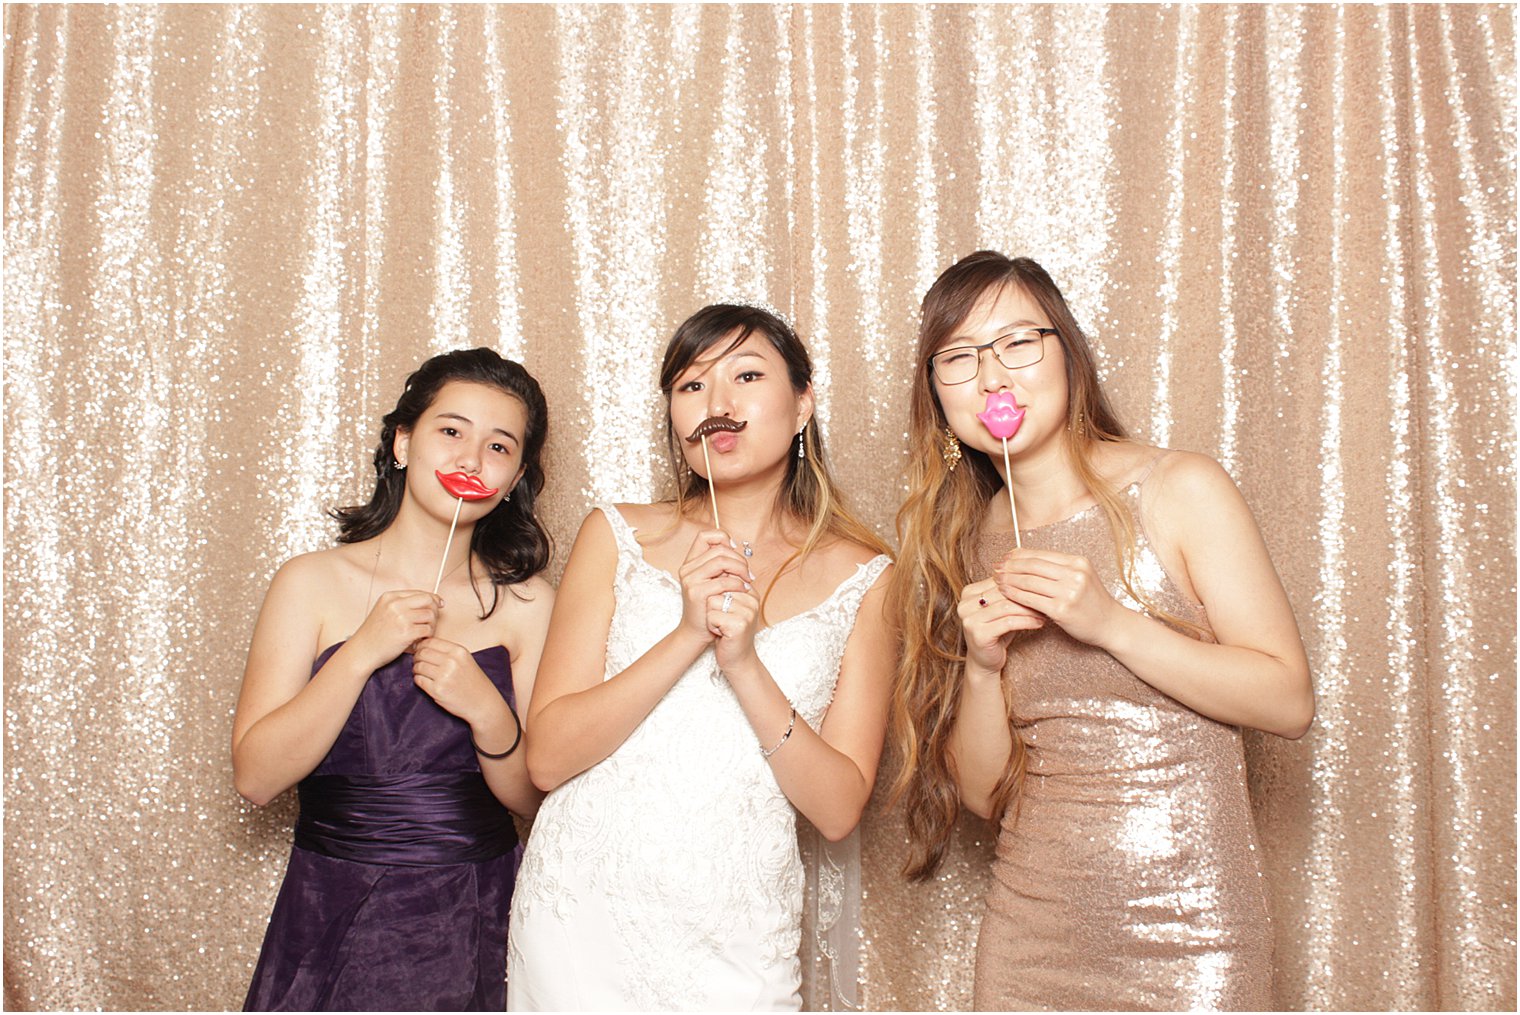 bride plays in photo booth with bridesmaid